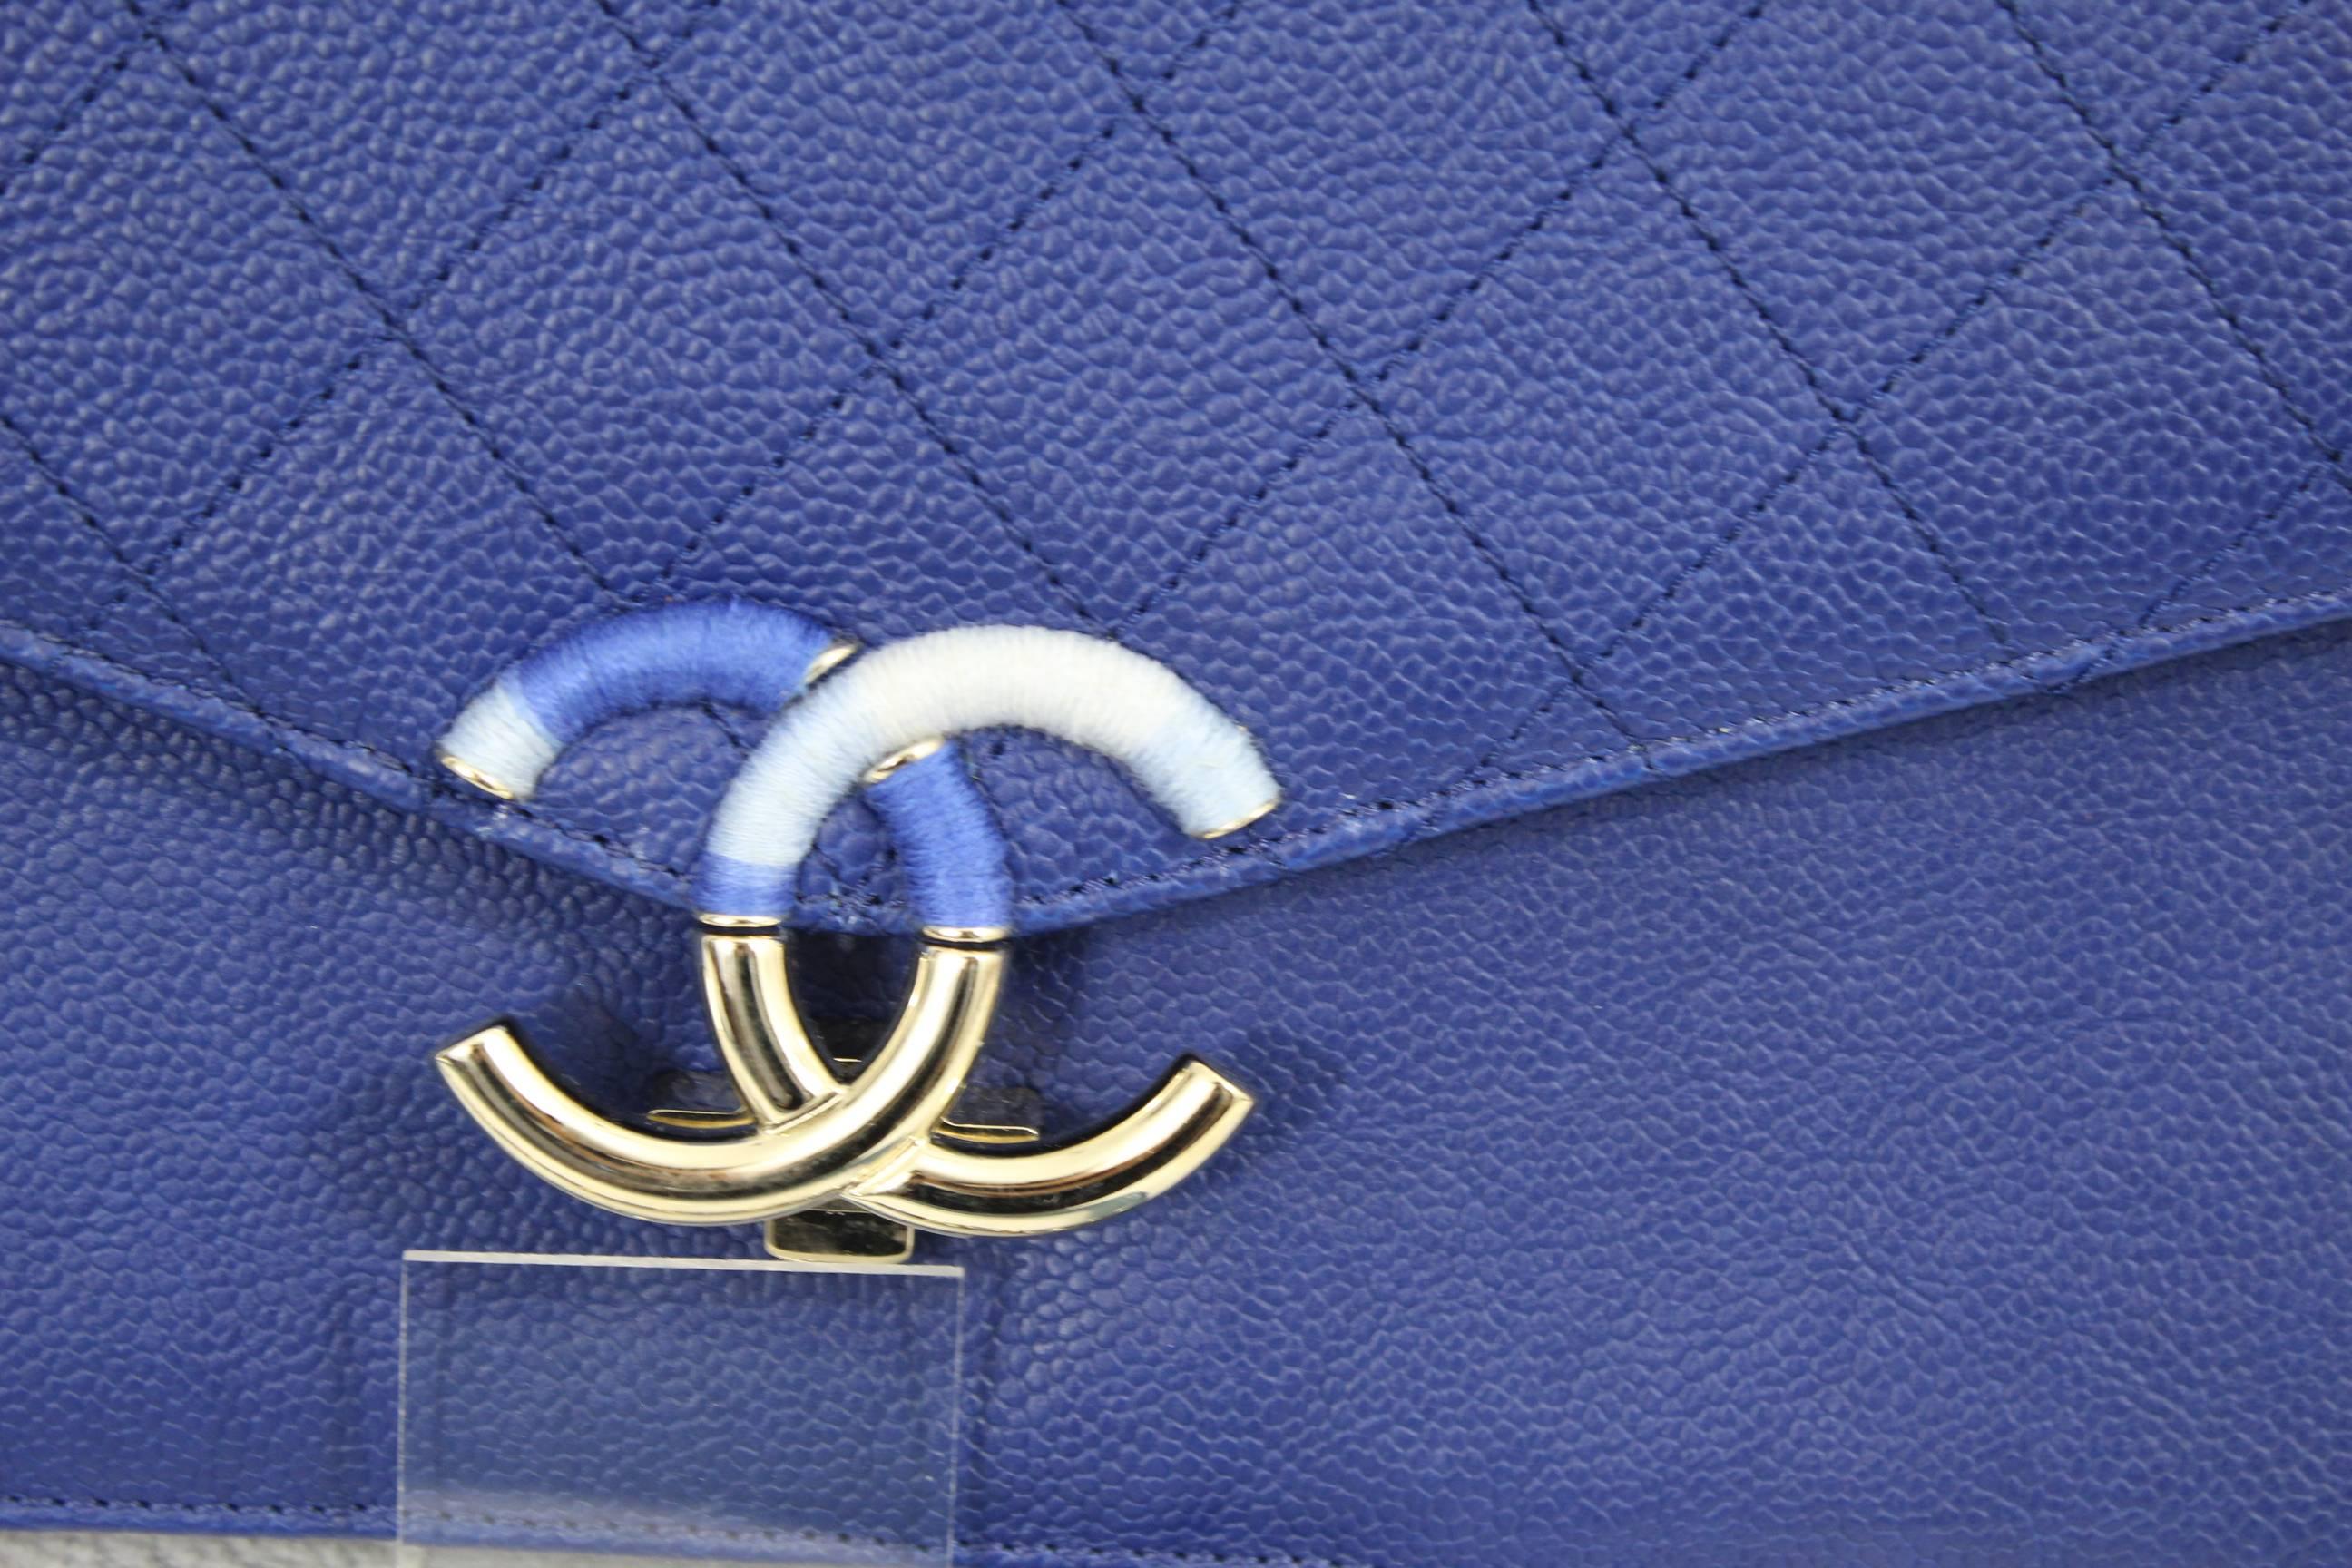 Awesome and unique Chanel Shoulder Bga in blue grained leather.

This bag is a pototype made for Chanel presentation ( see label inside) so unique piece.

Chain in blue leathe rin different tonalities of blue

Size 28x19 centimeters